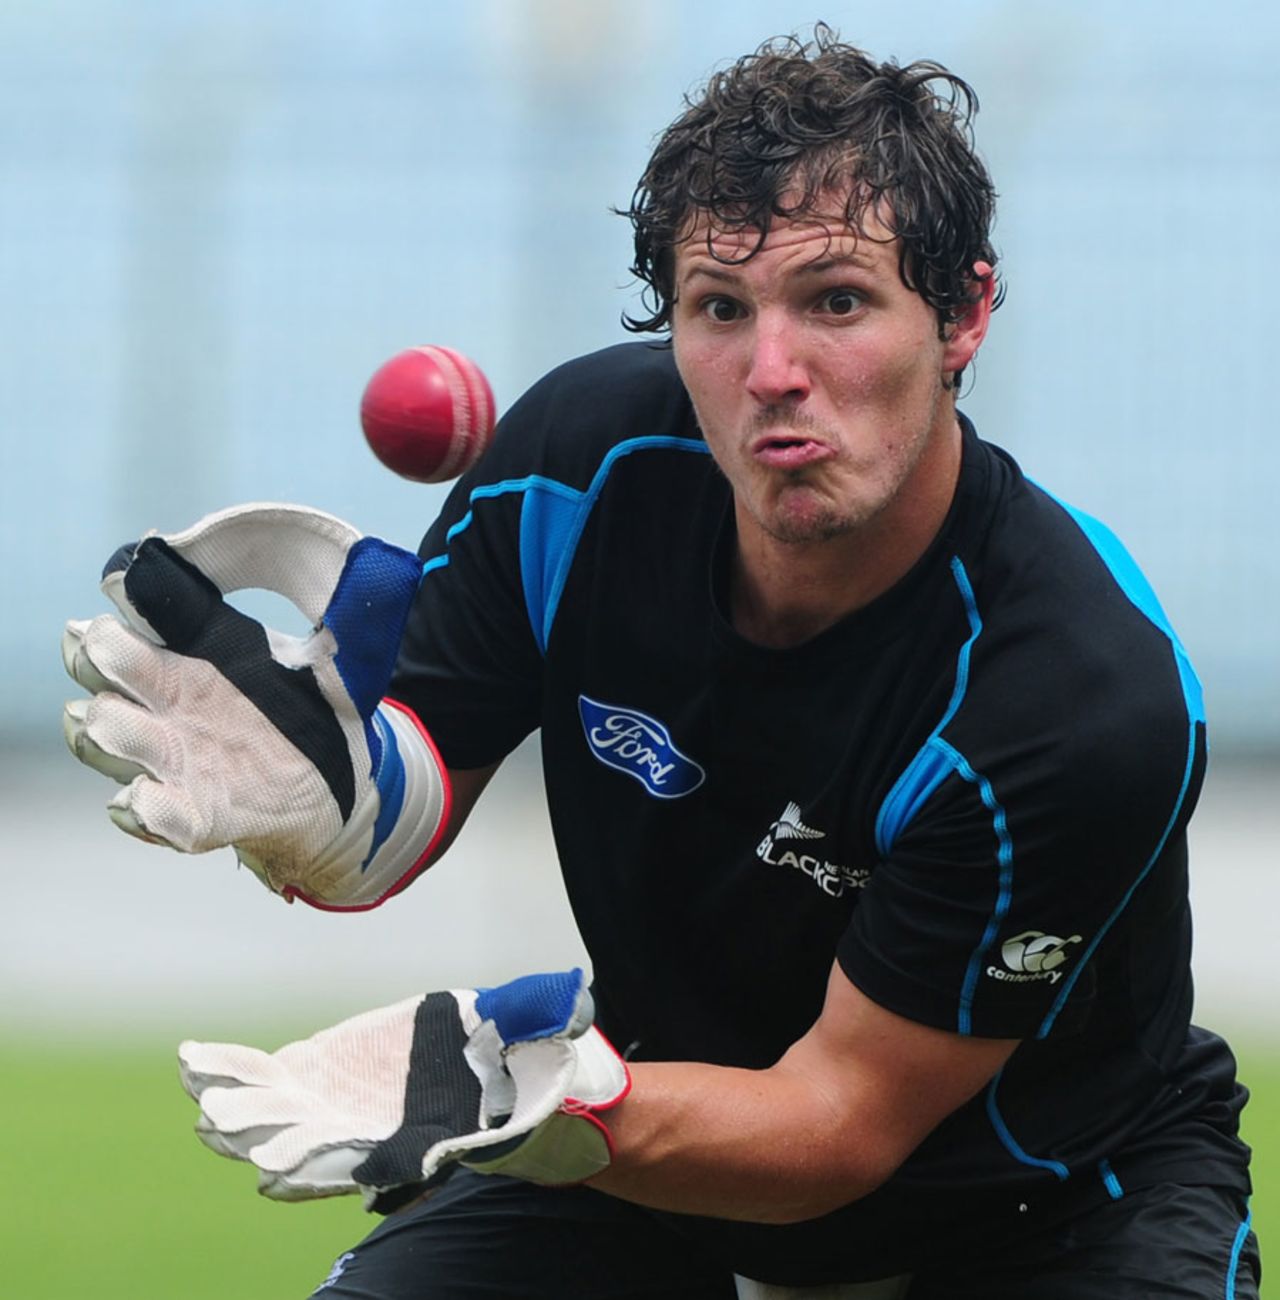 BJ Watling practises catching during a nets session, Chittagong, October 7, 2013